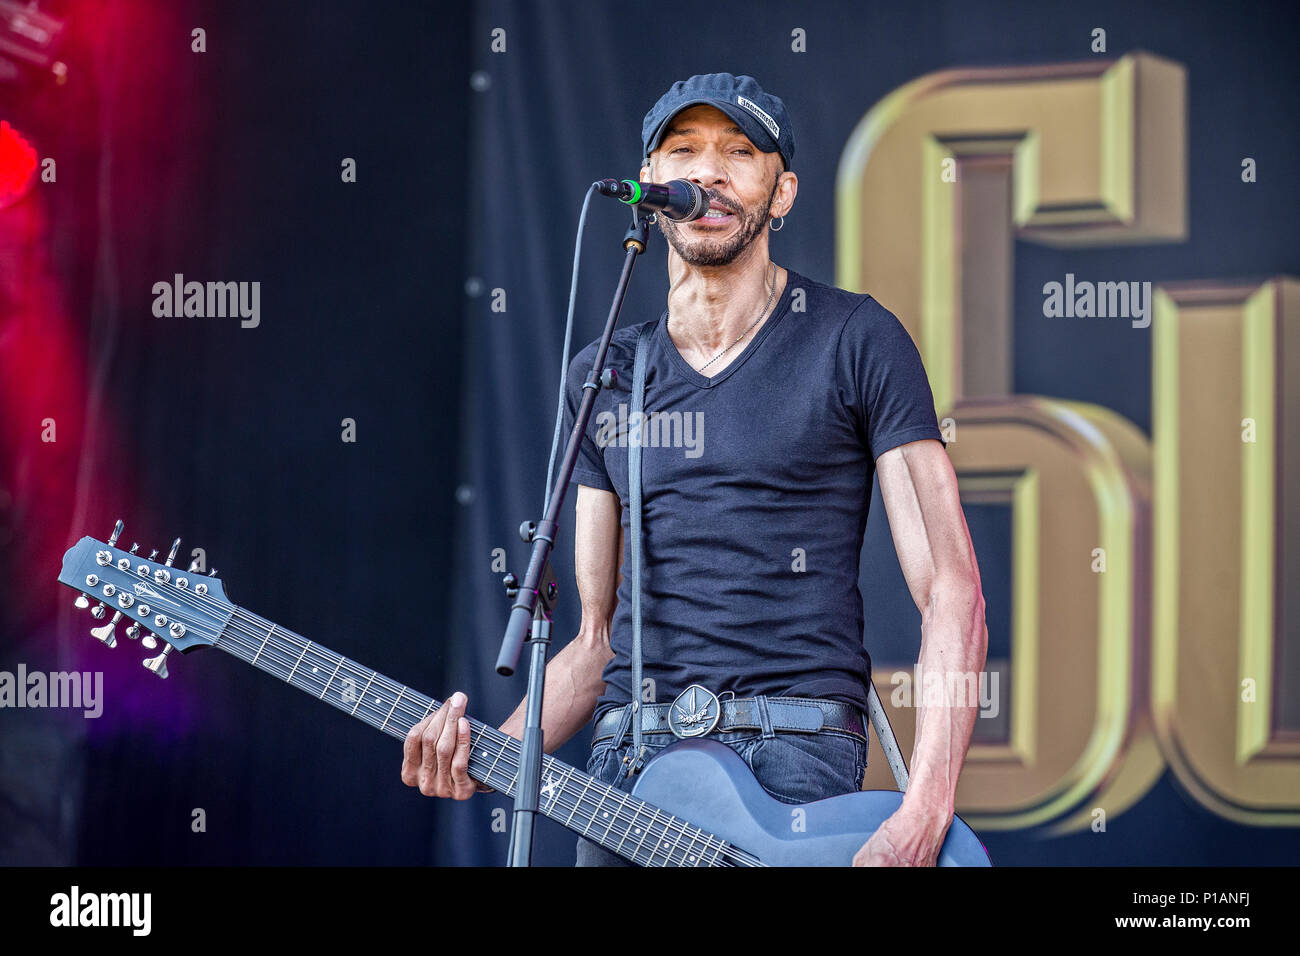 Sweden, Solvesborg - June 9, 2017. The American rock band King’s X performs a live concert during the Swedish music festival Sweden Rock Festival 2017 in Blekinge. Here vocalist and bass player Doug Pinnick is seen live on stage. (Photo credit: Gonzales Photo - Terje Dokken). Stock Photo